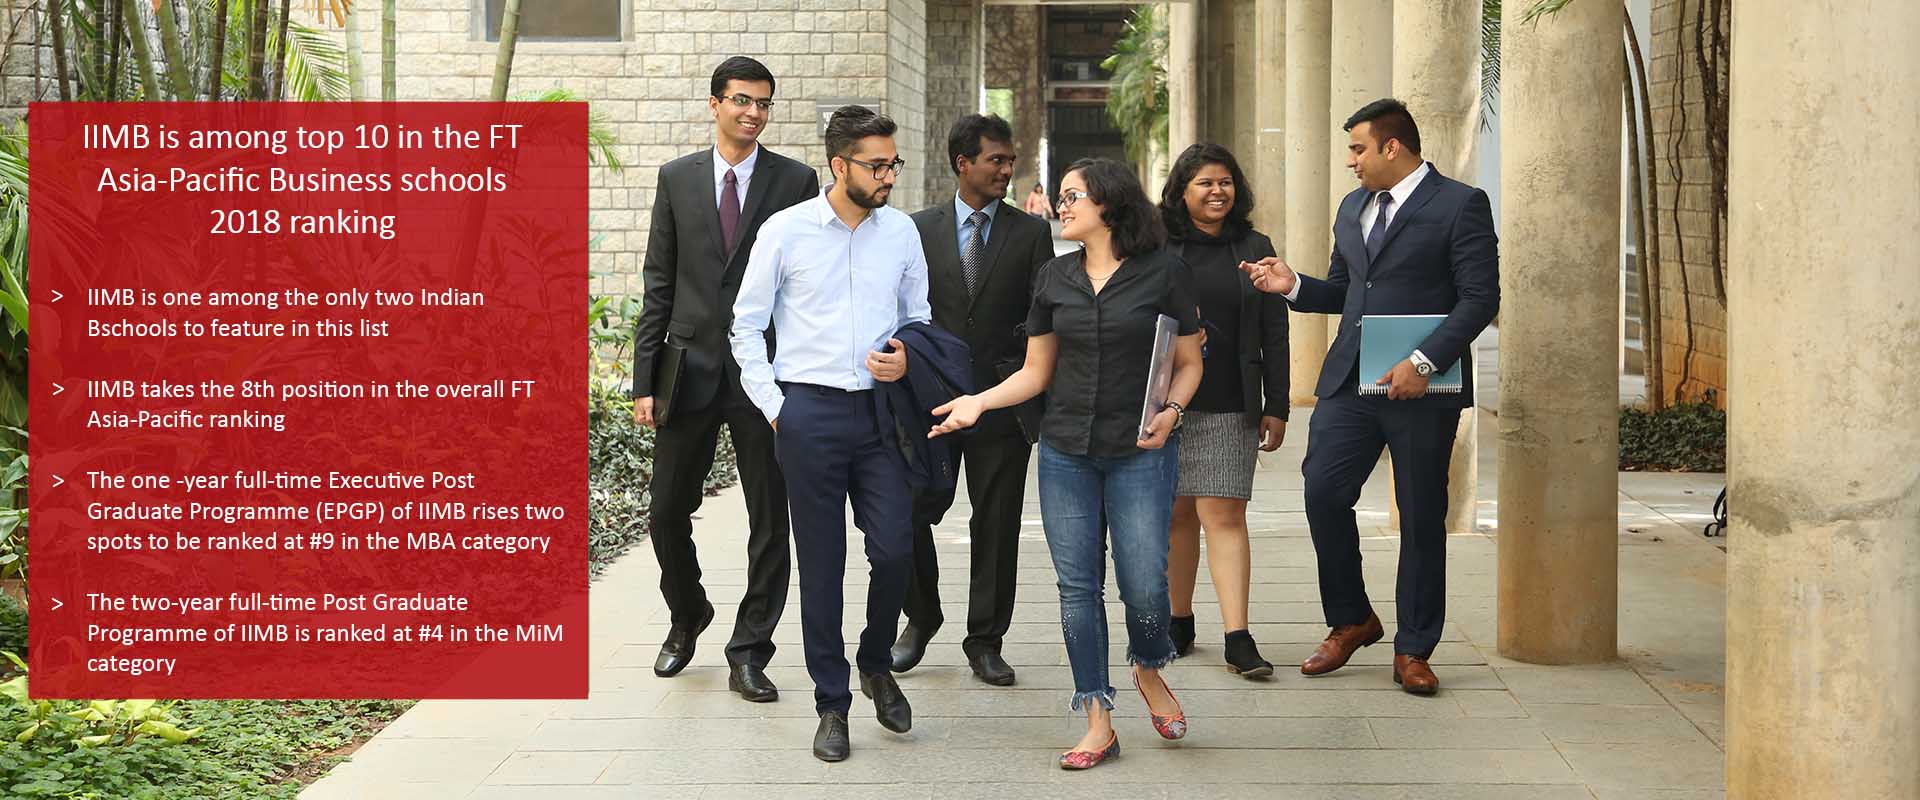 IIM Bangalore is among top 10 in the FT Asia-Pacific Business schools 2018 ranking